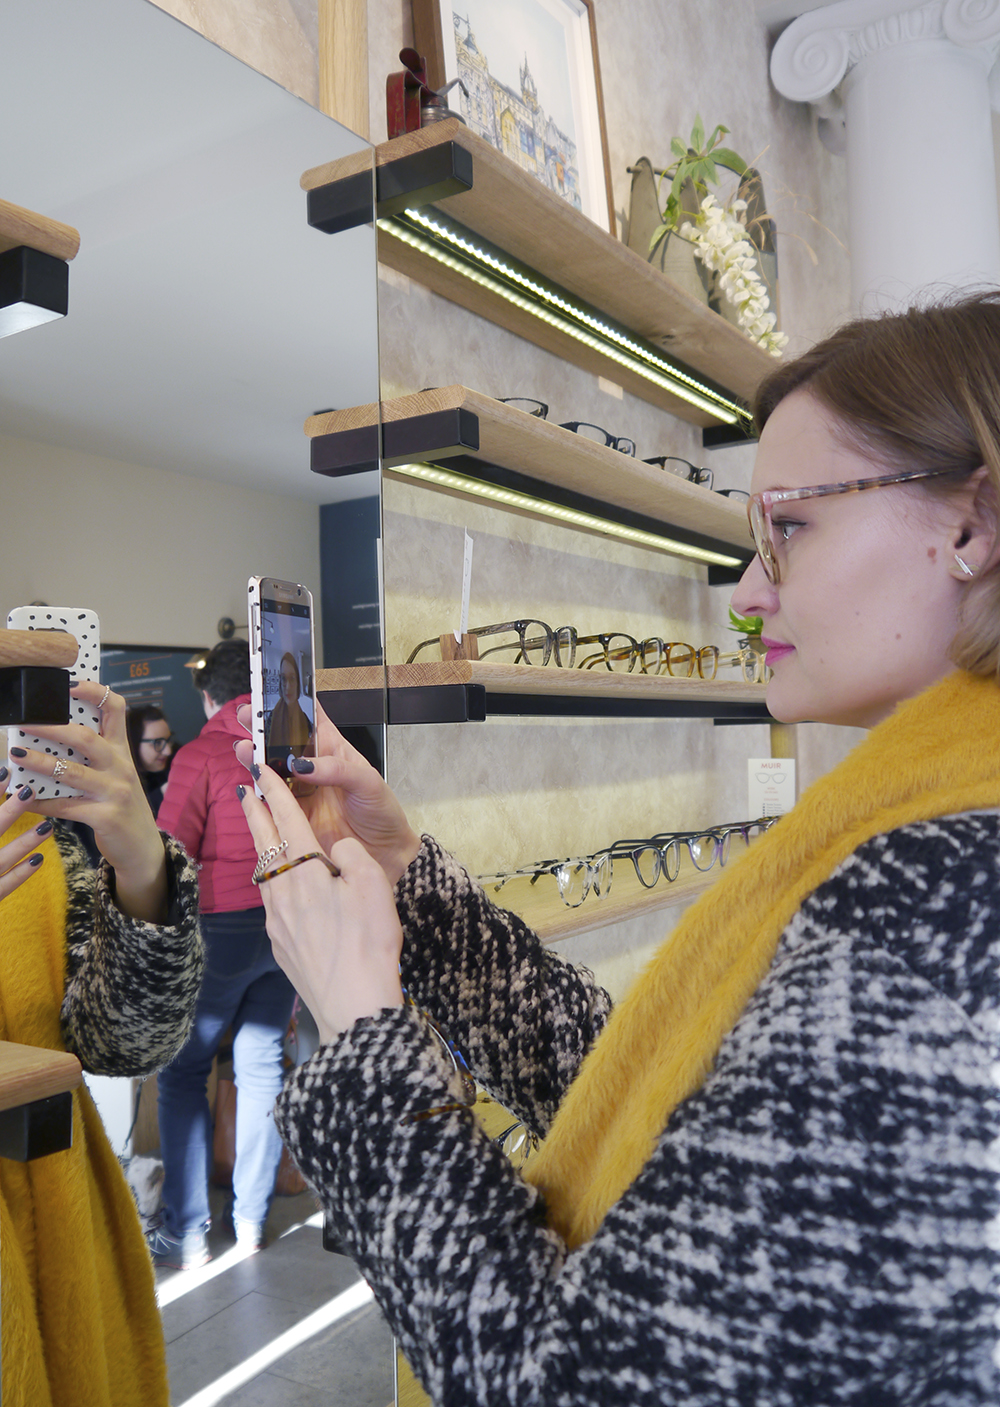 Scottish bloggers Wardrobe Conversations share their top tips for shopping for spectacles